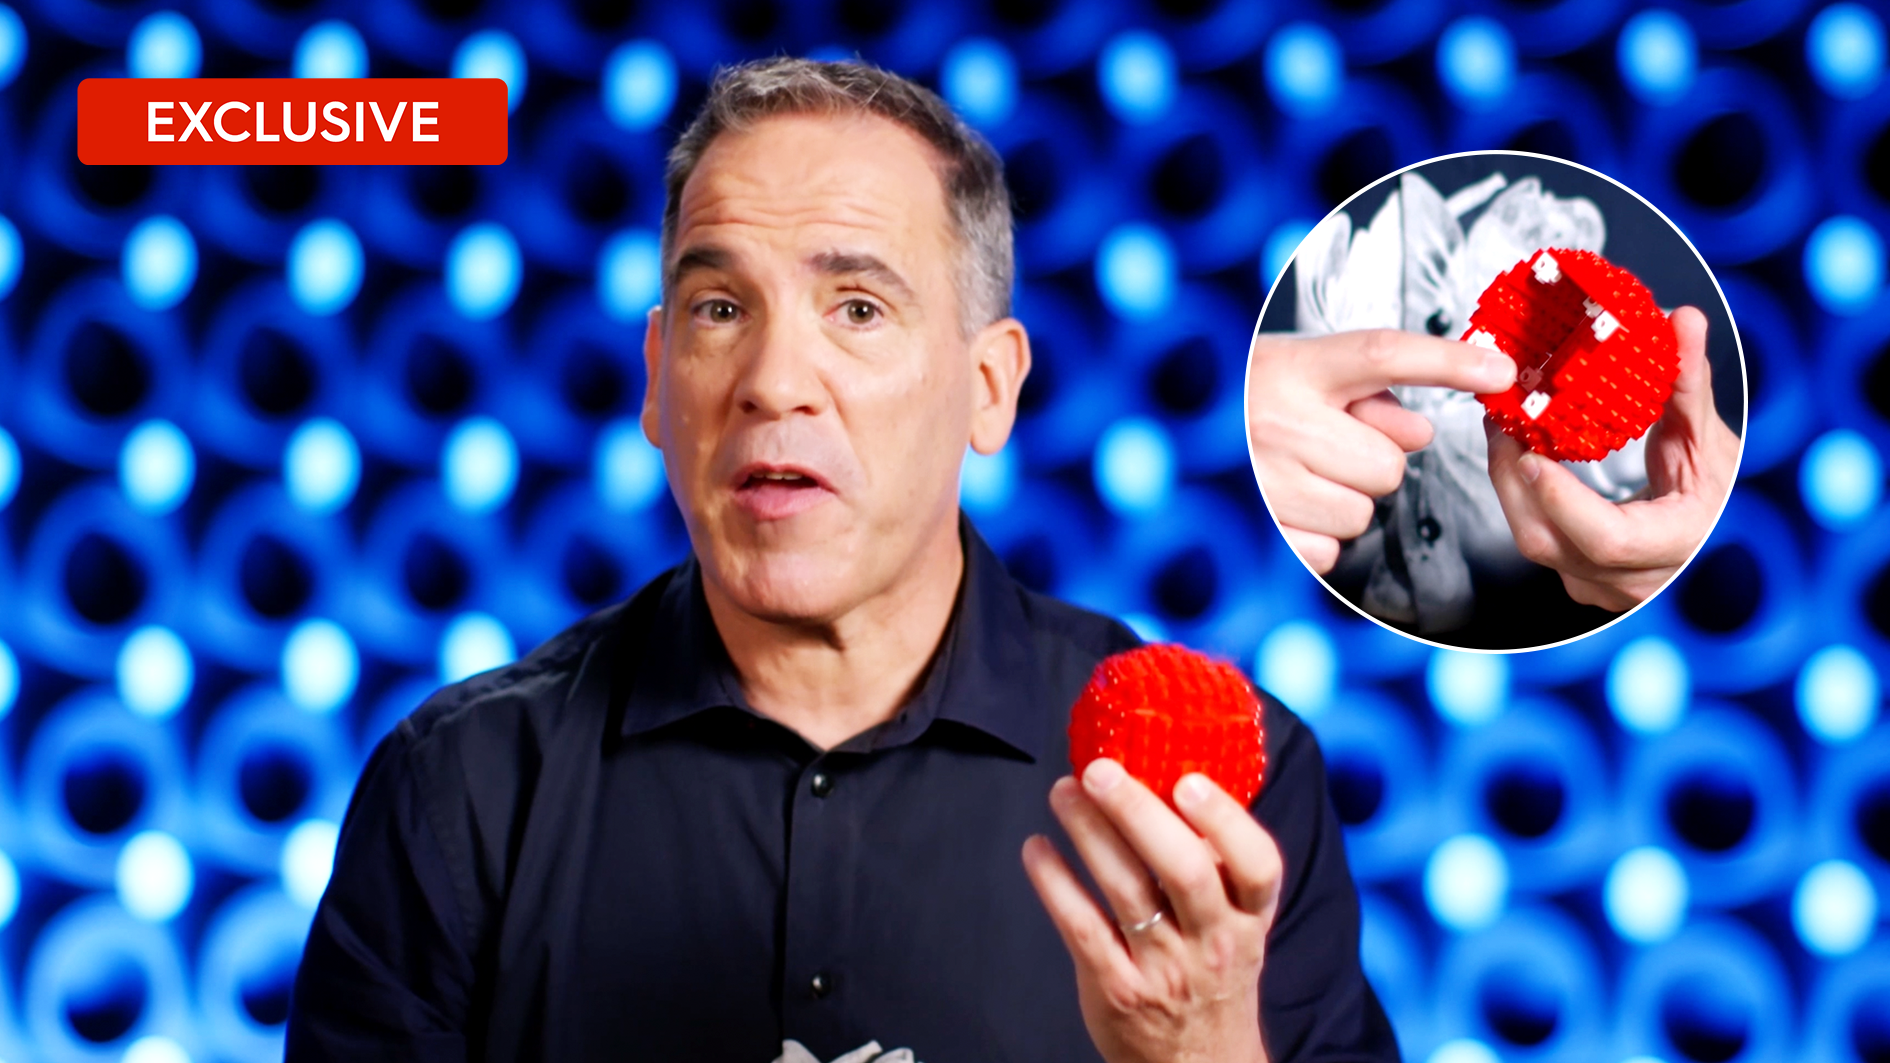 Excusive: Brickman shows how to build a LEGO SNOT ball